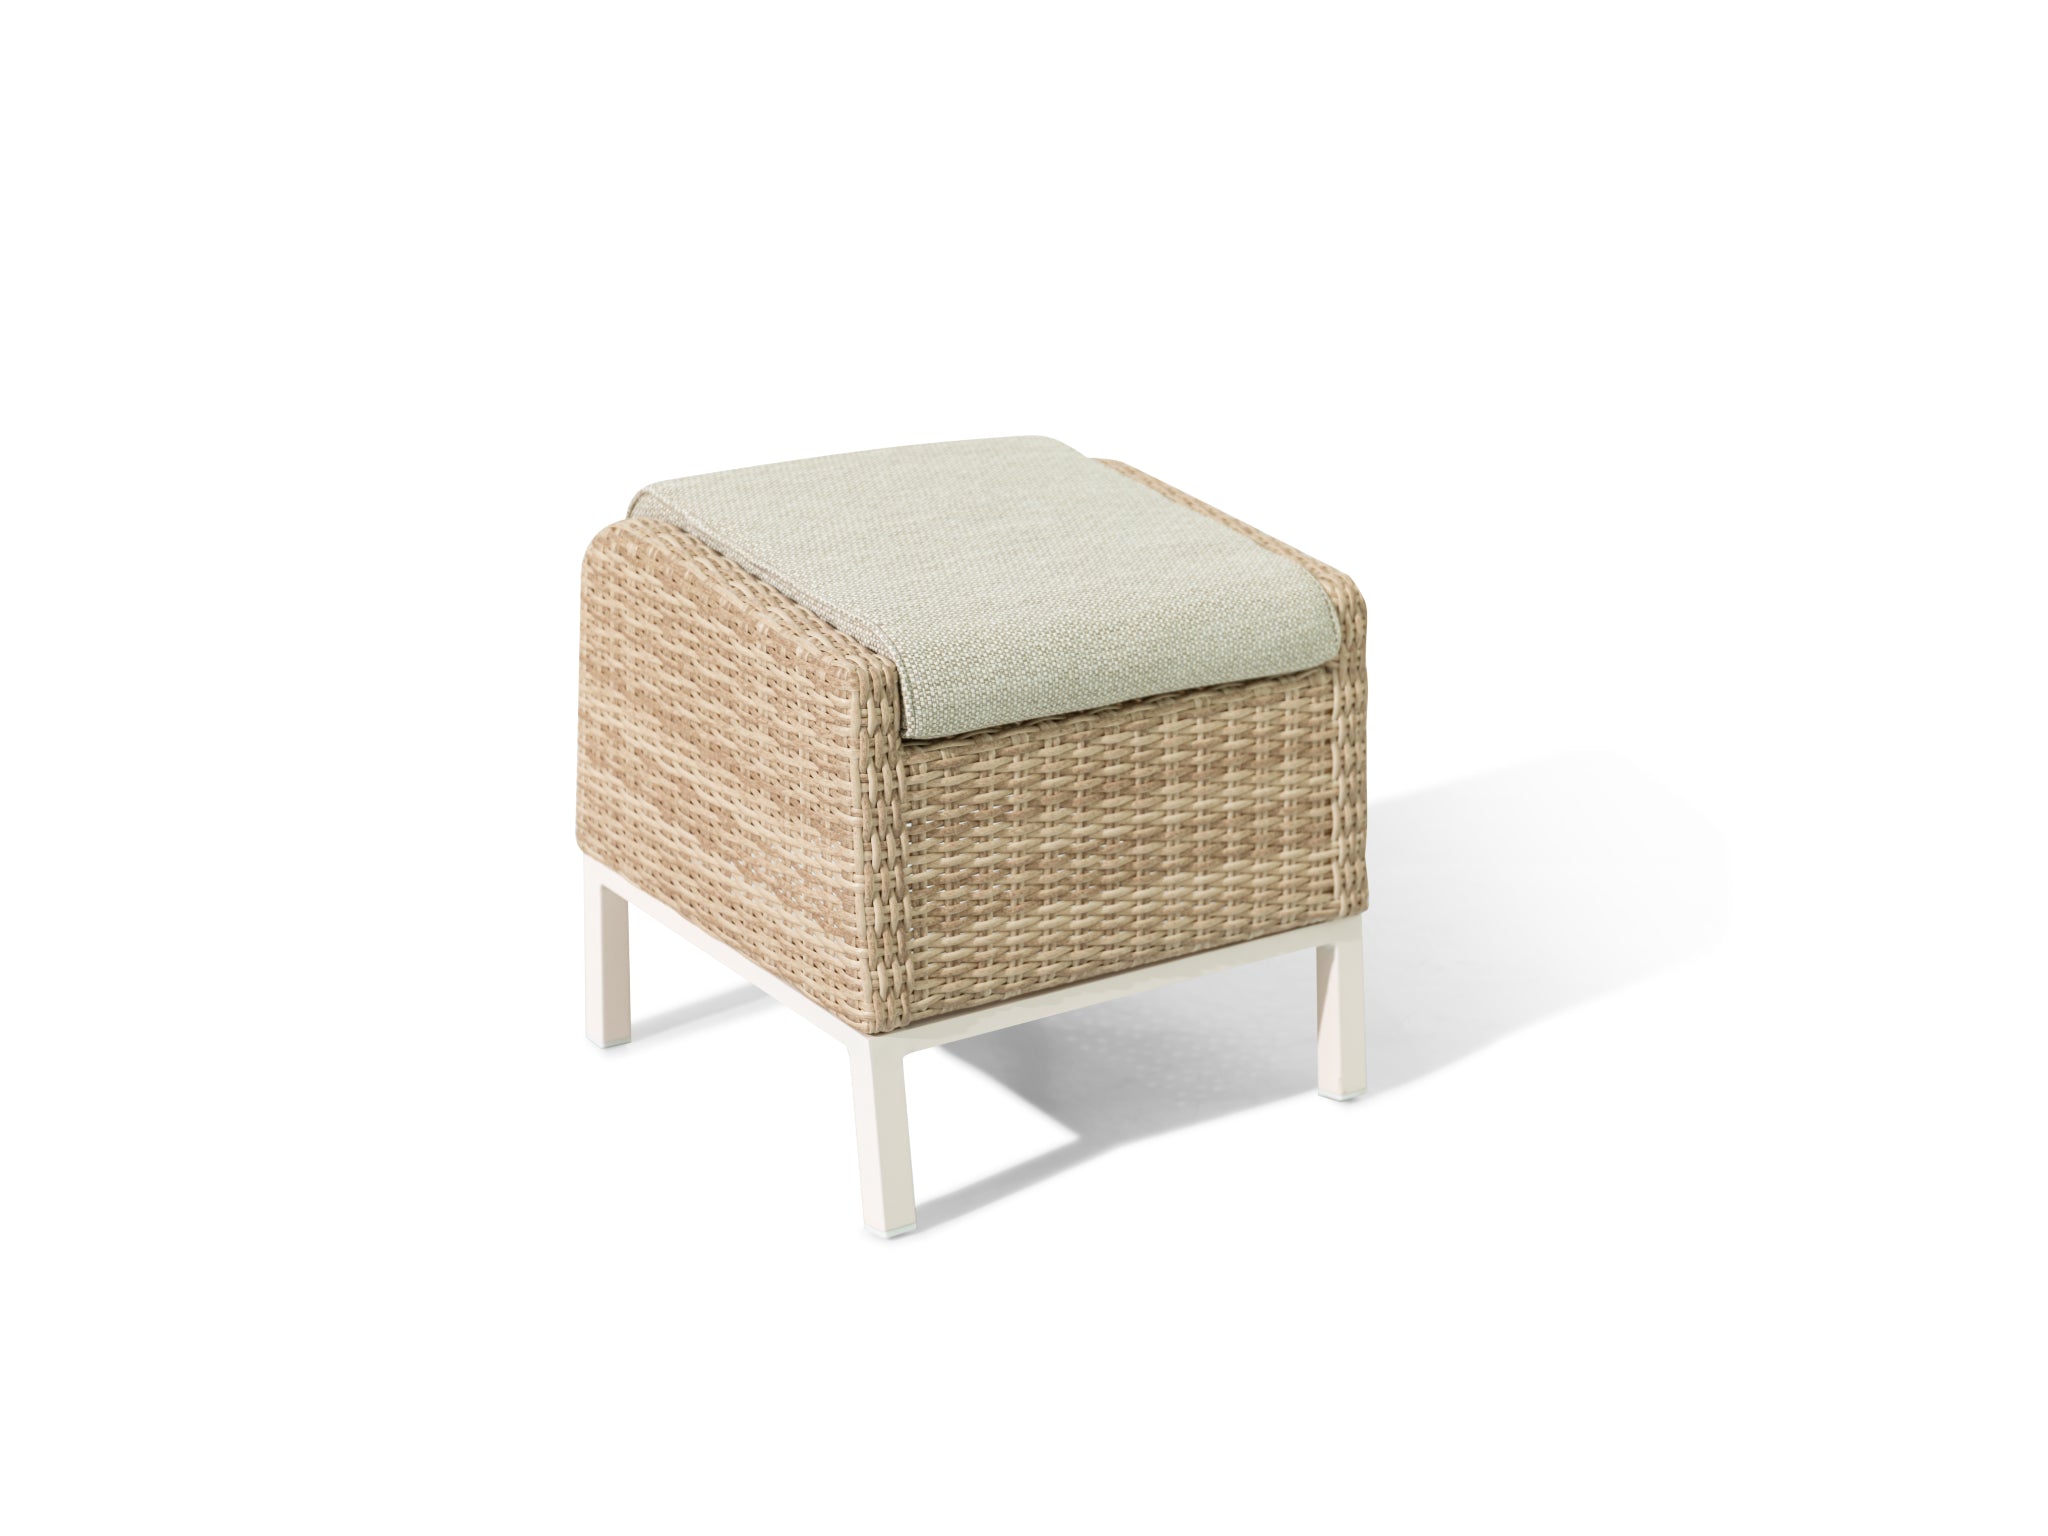 SIMPO by Sunlongarden Lilly Footstool